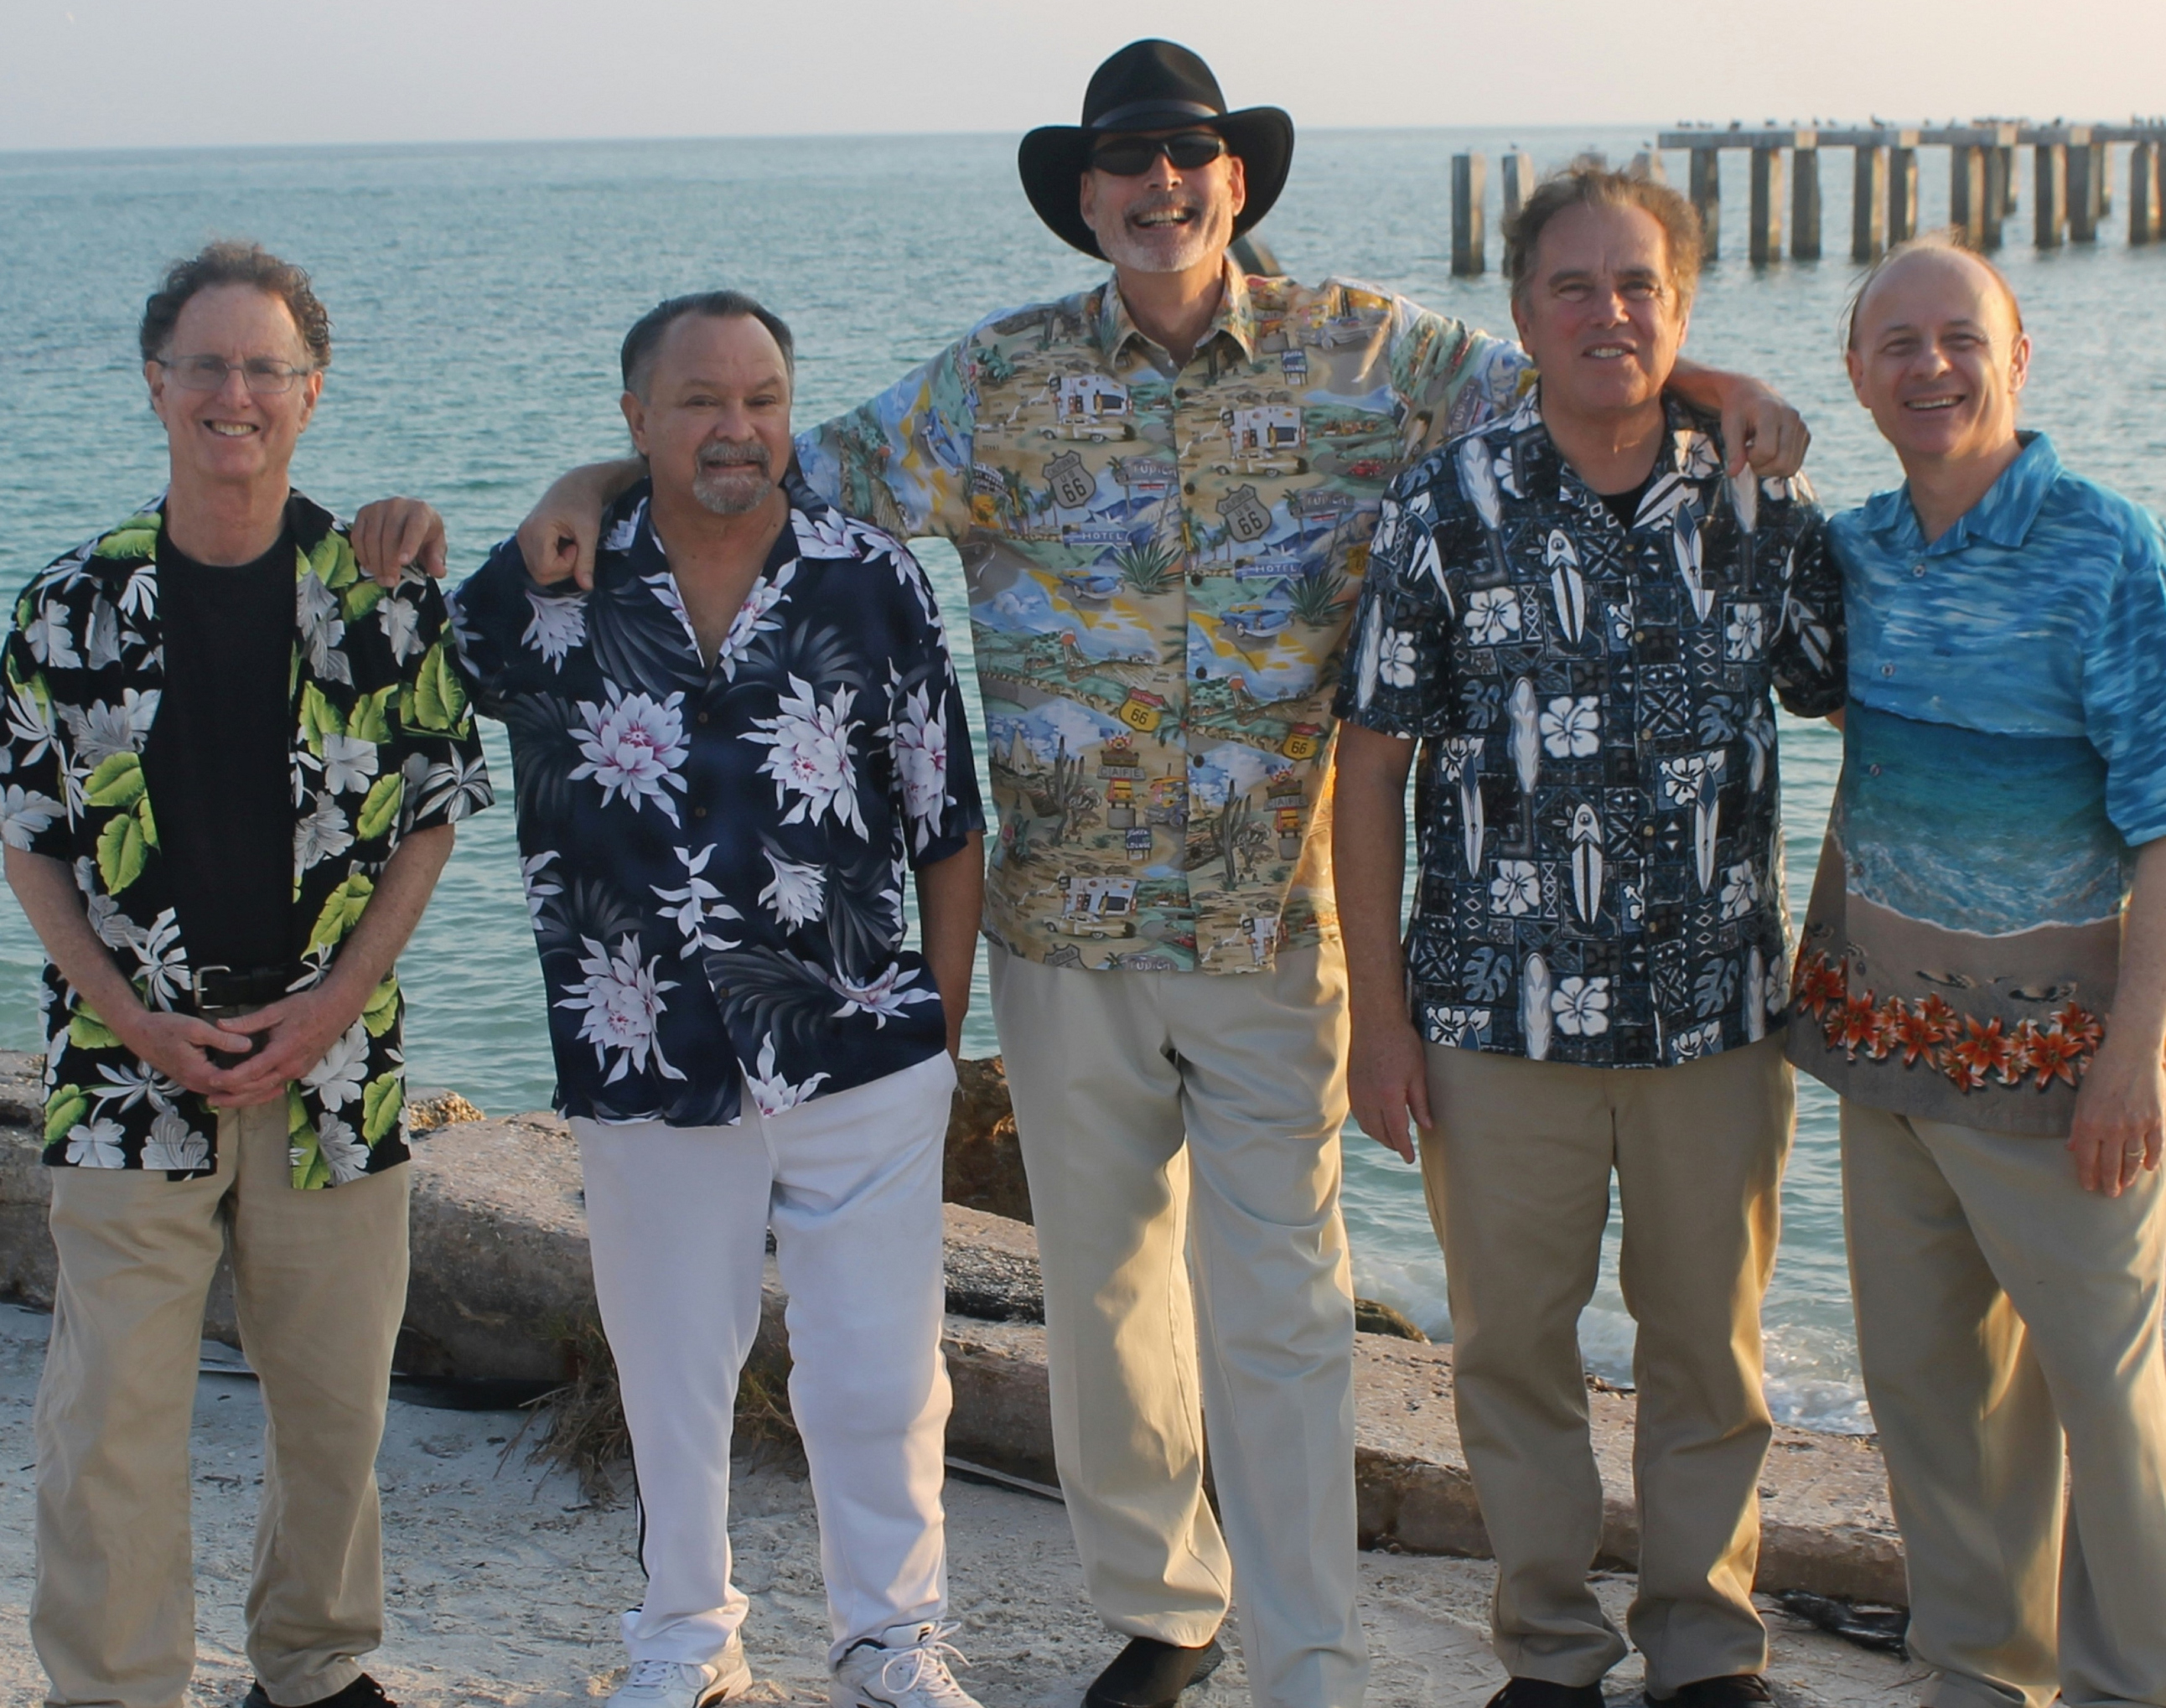 The Retro Festival 2022 - California Surf Incorporated feat. Former Members of the Beach Boys